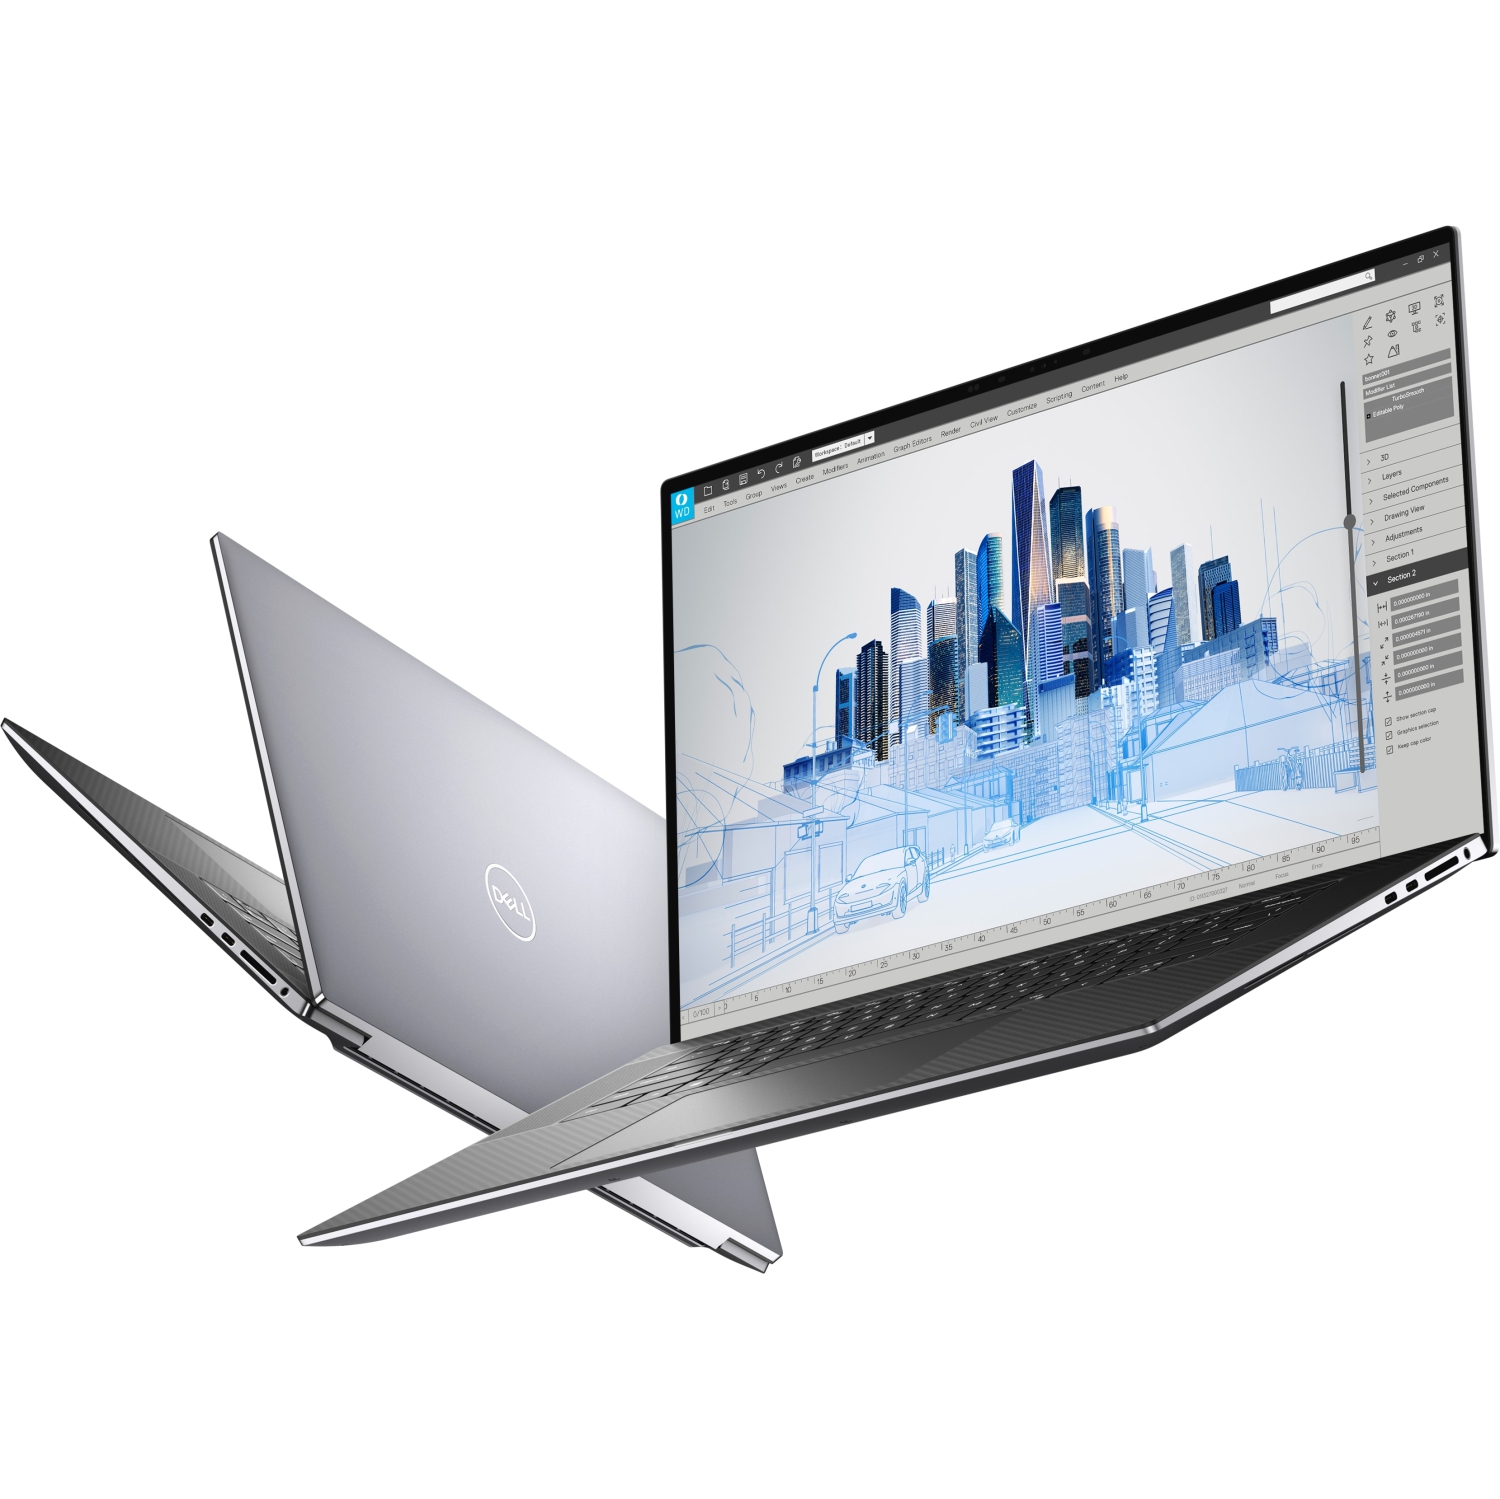 Refurbished (Excellent) – Dell Precision 5000 5760 Workstation Laptop (2021) | 17" FHD+ | Core i7 - 2TB SSD - 16GB RAM - RTX A3000 | 8 Cores @ 4.8 GHz - 11th Gen CPU - 6GB GDDR6